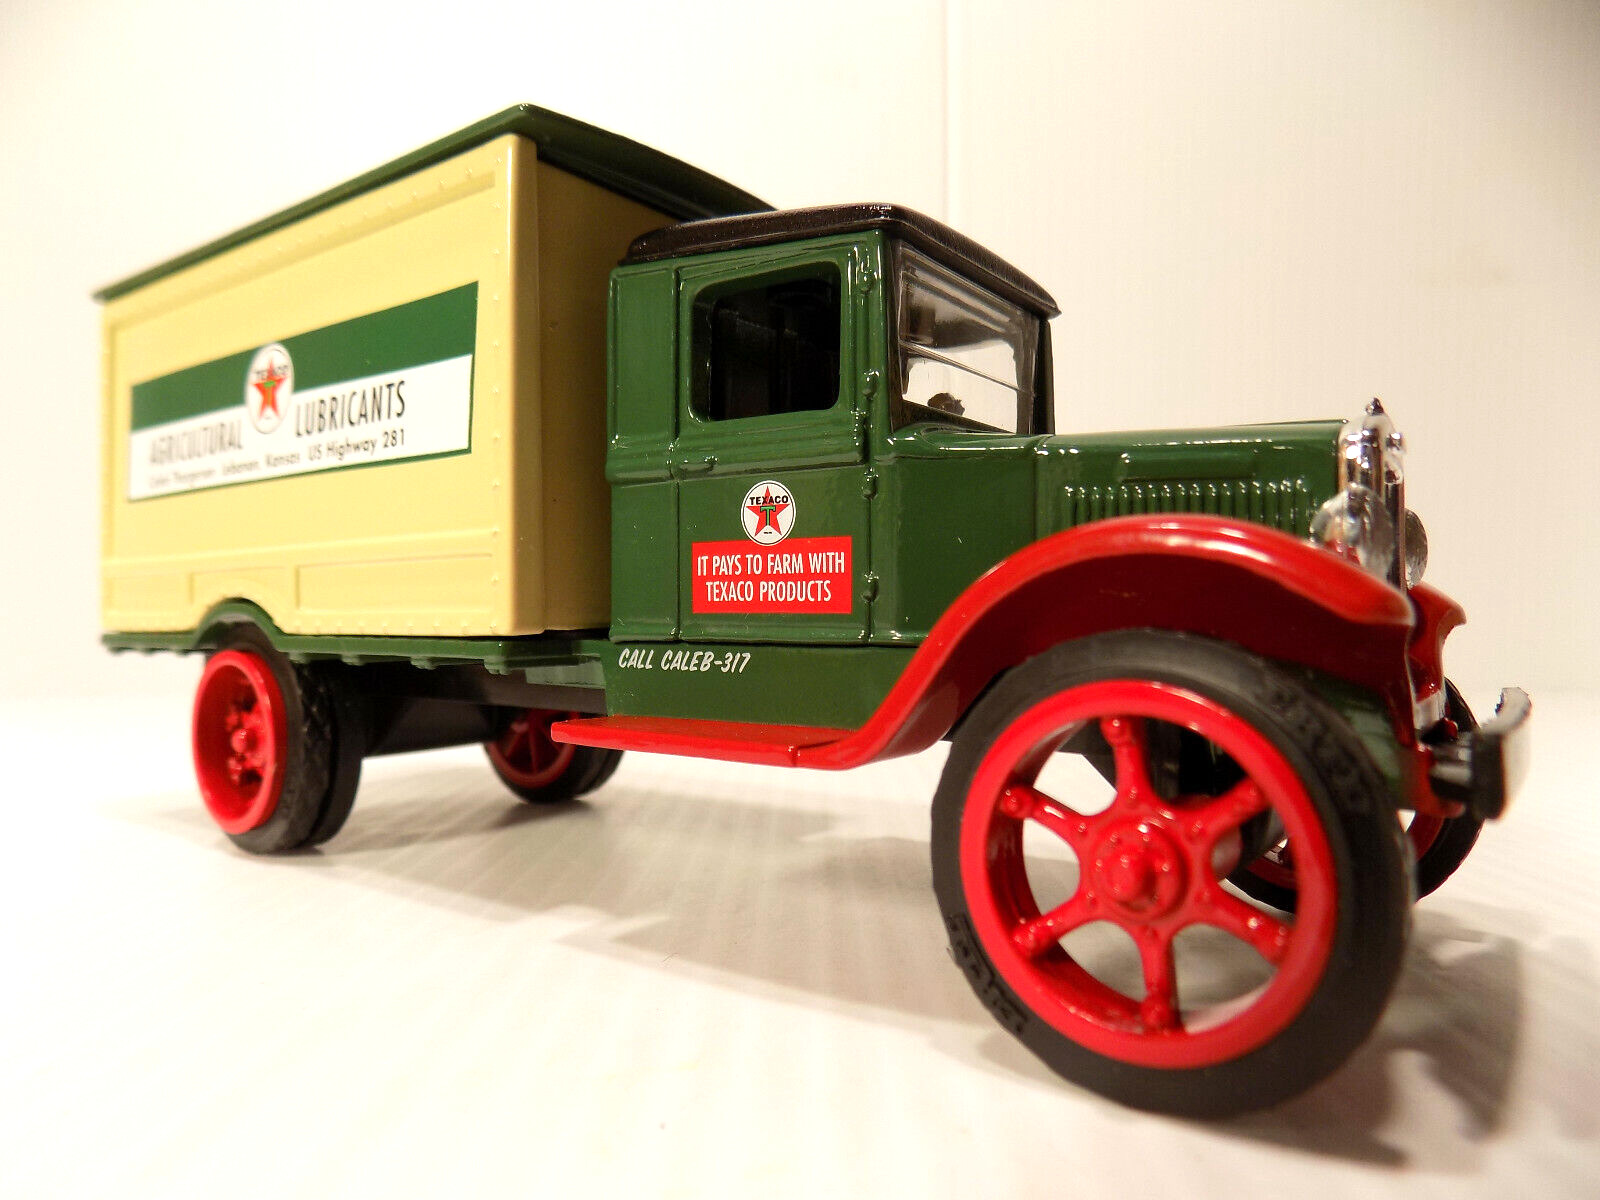 2020 BRANDS OF TEXACO 1931 HAWKEYE FARM SUPPLY DELIVERY TRUCK #3 IN THE SERIES